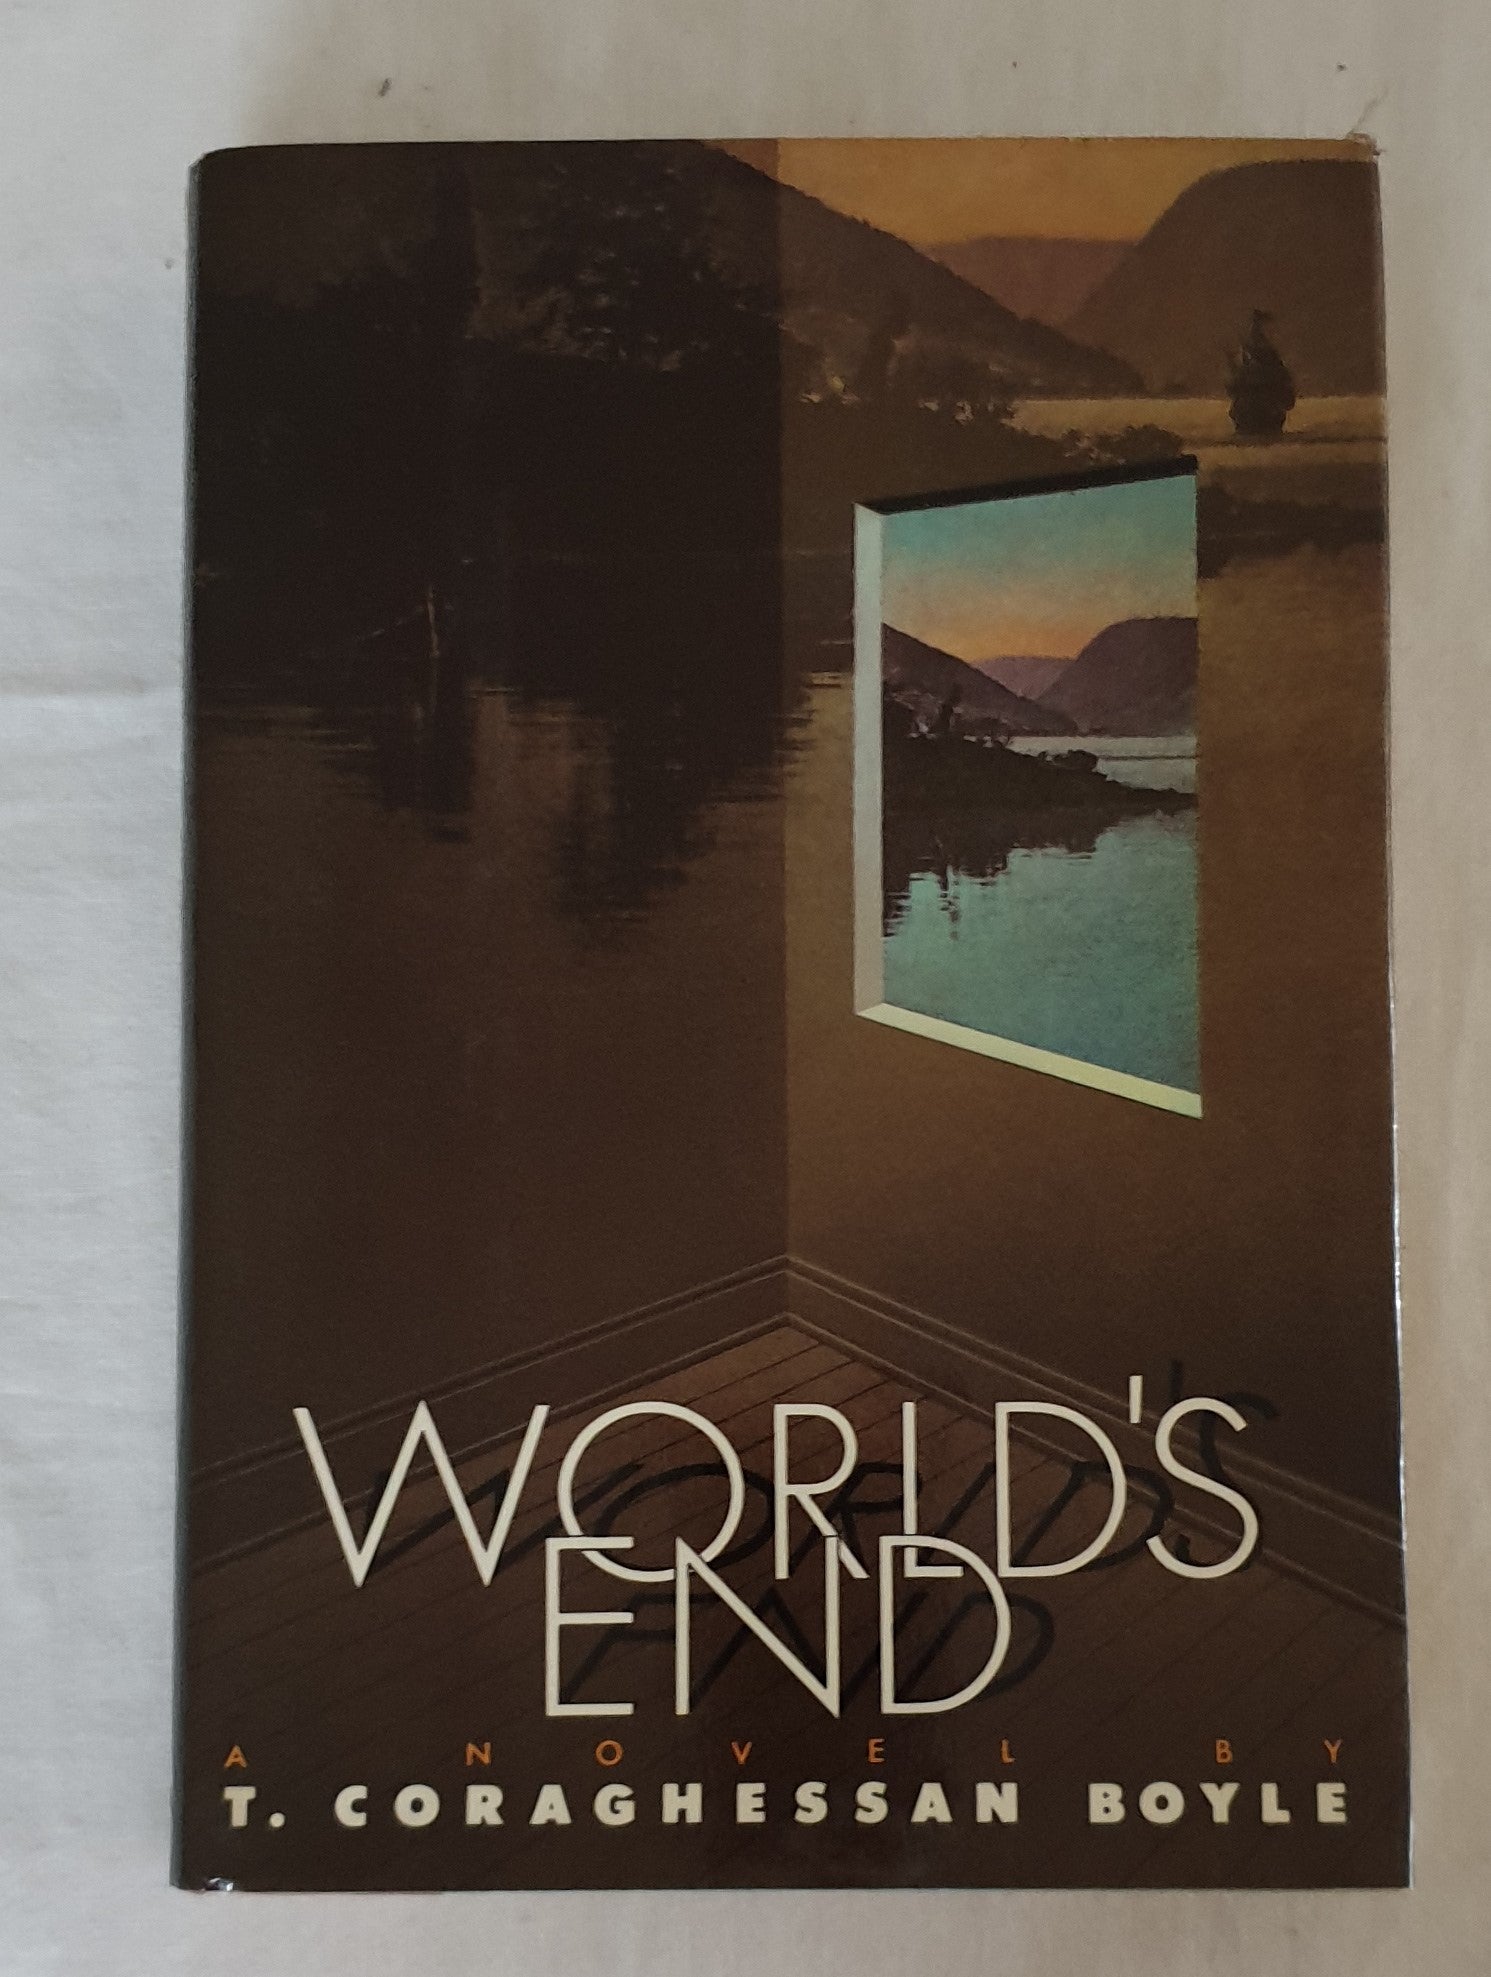 World's End by T. Coraghessan Boyle